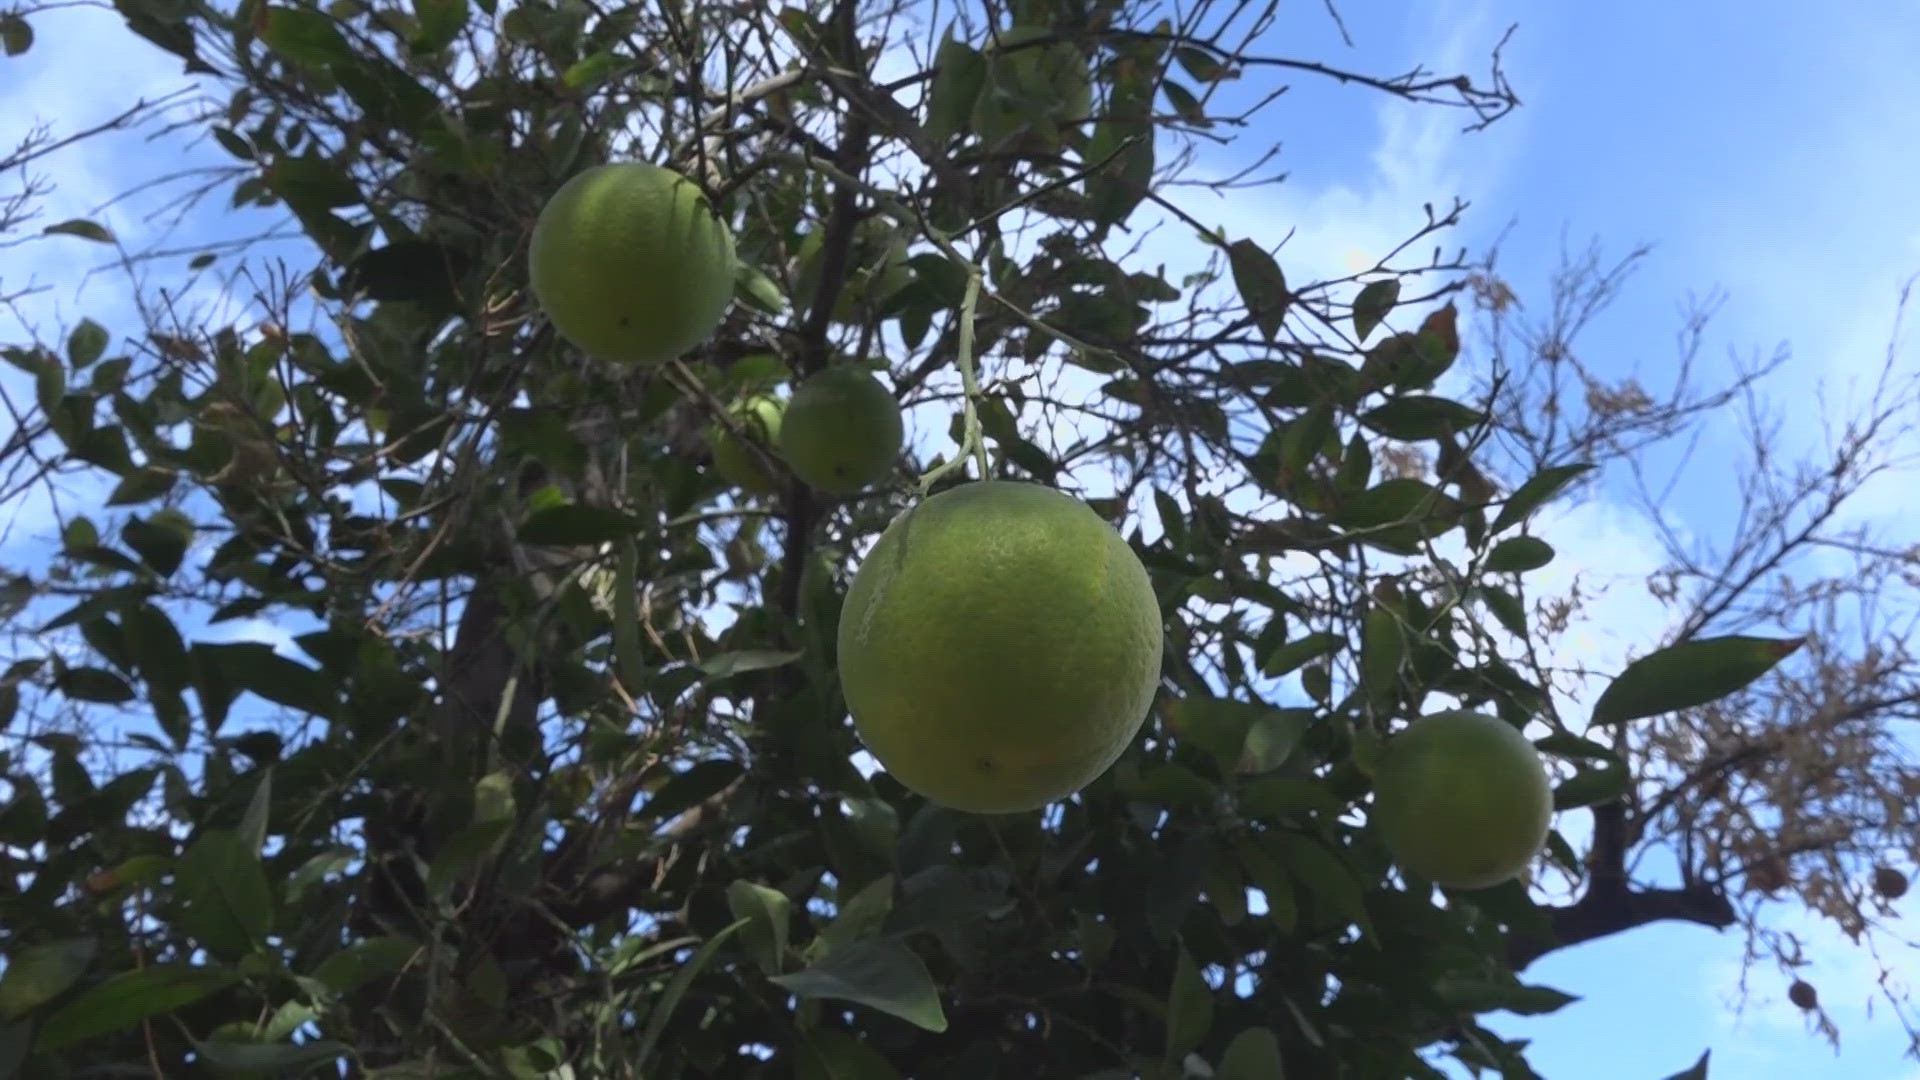 Phoenix totaled 54 days of 110 degree temperatures or higher in 2023, citrus trees were amongst those that suffered because of it.